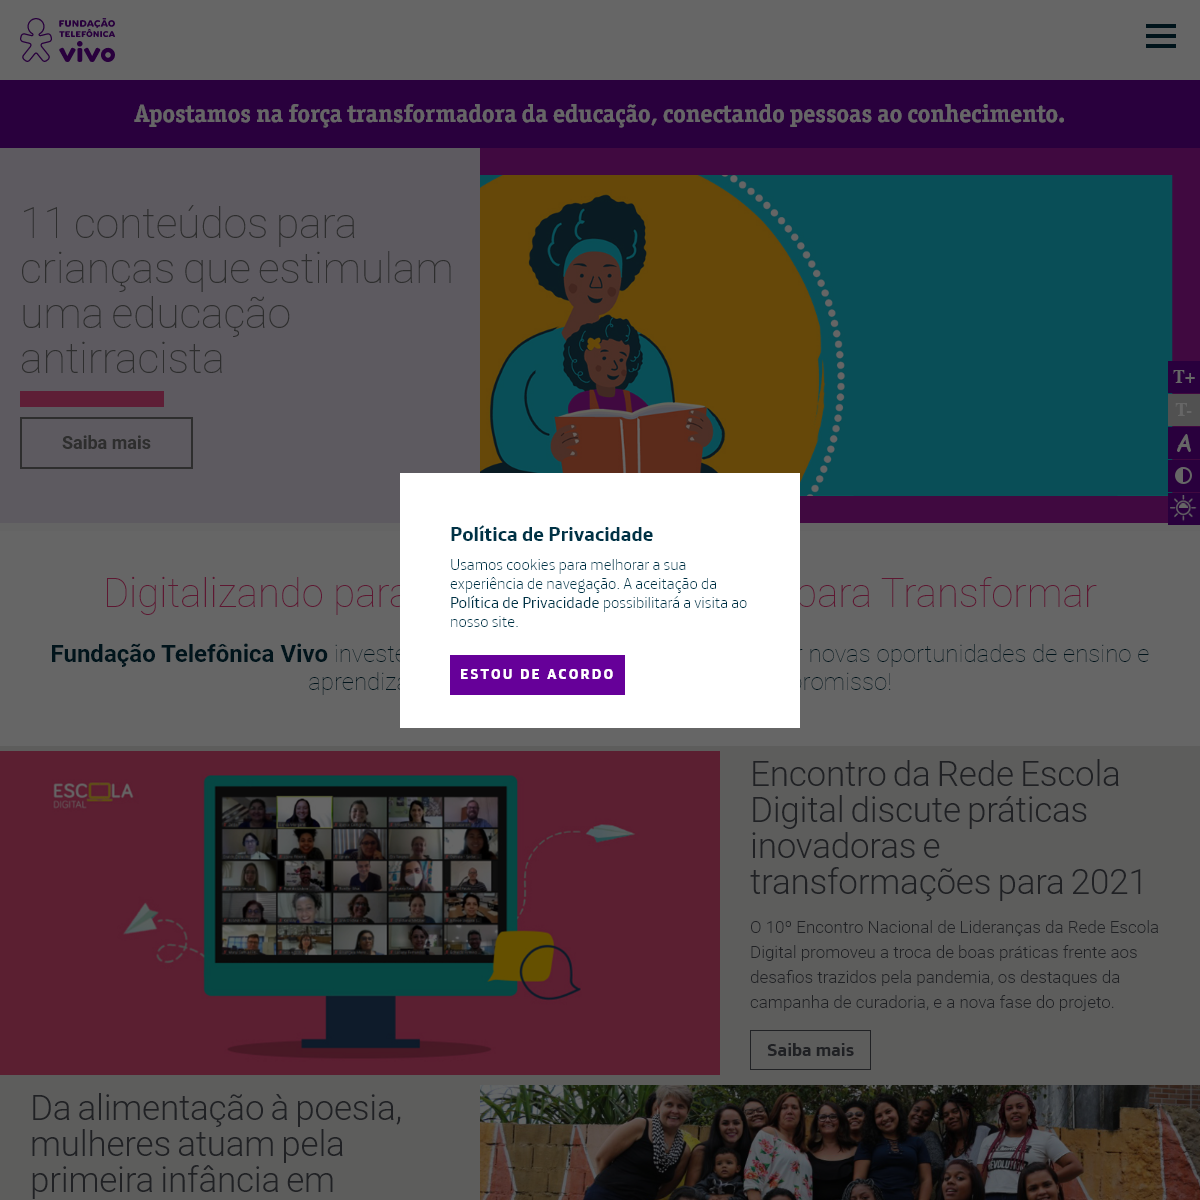 A complete backup of fundacaotelefonica.org.br